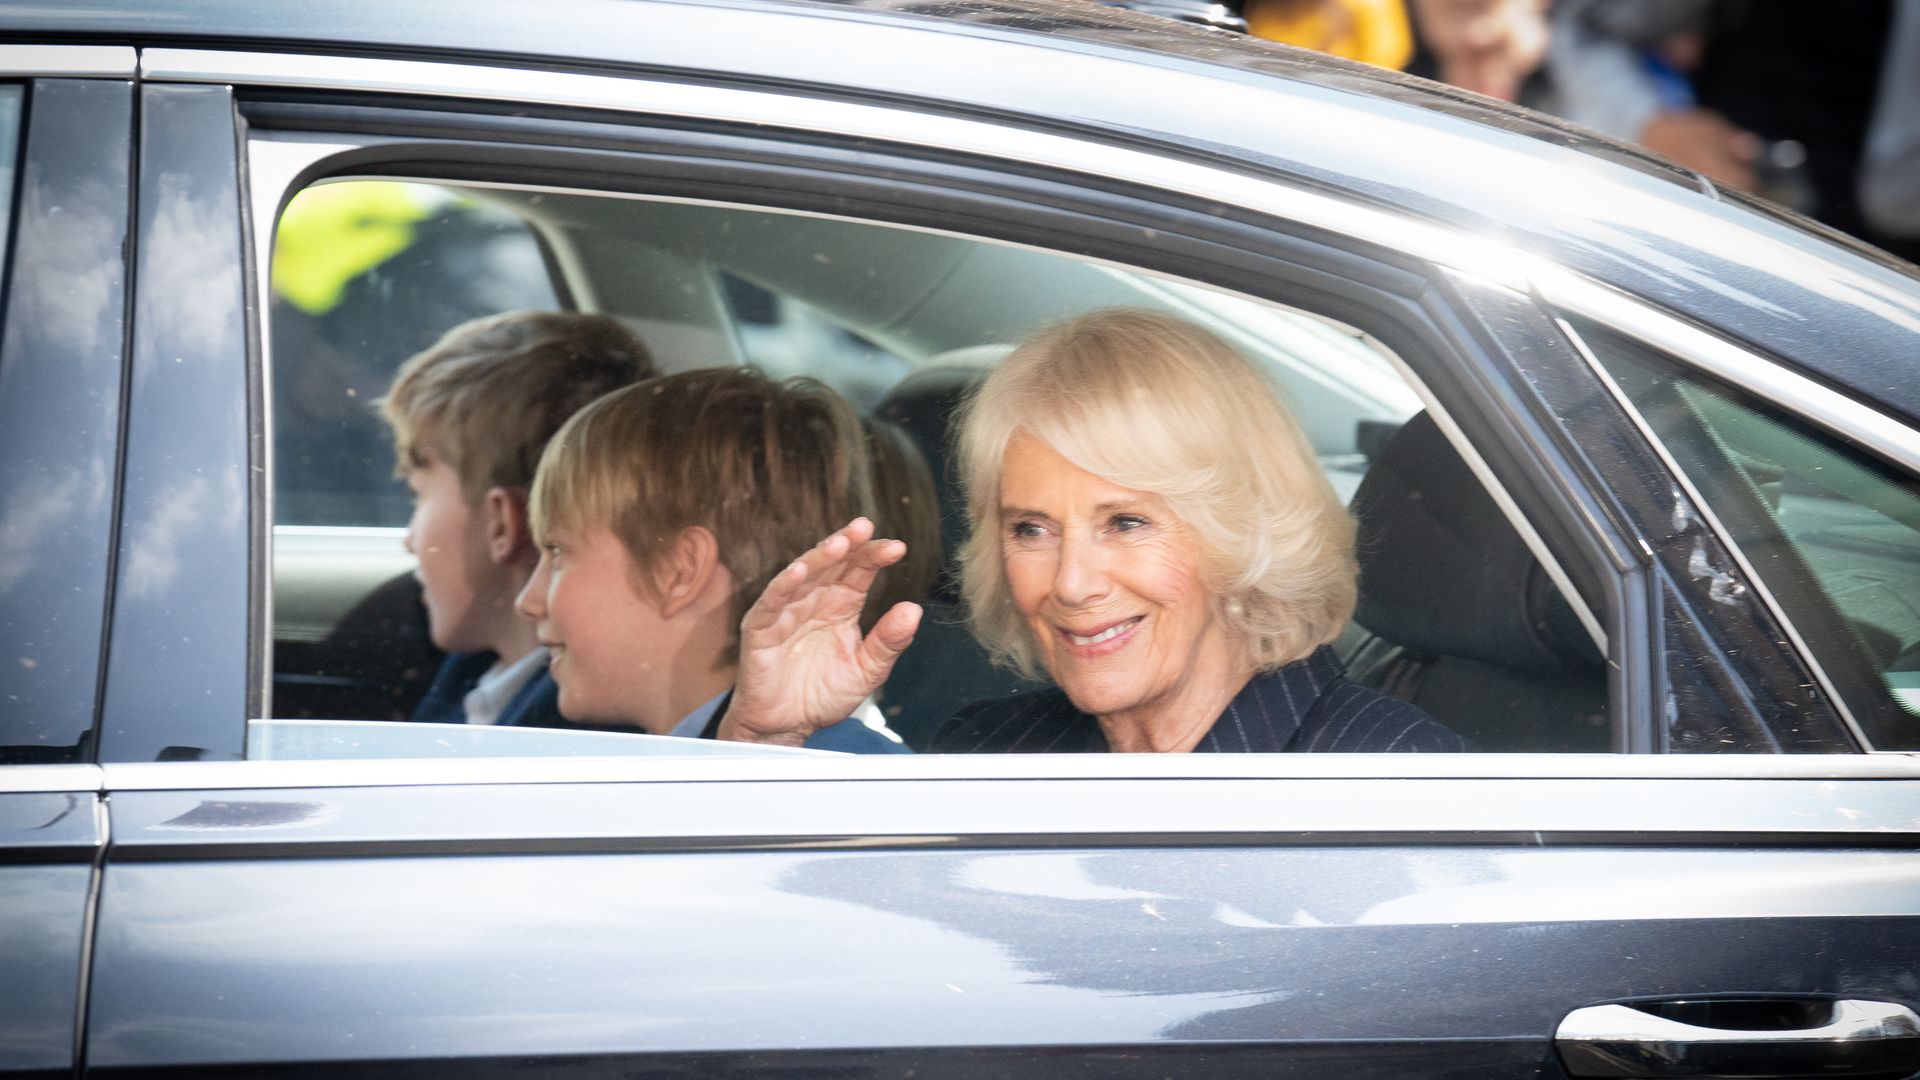 The Queen Consort leaves coronation rehearsal with her grandsons